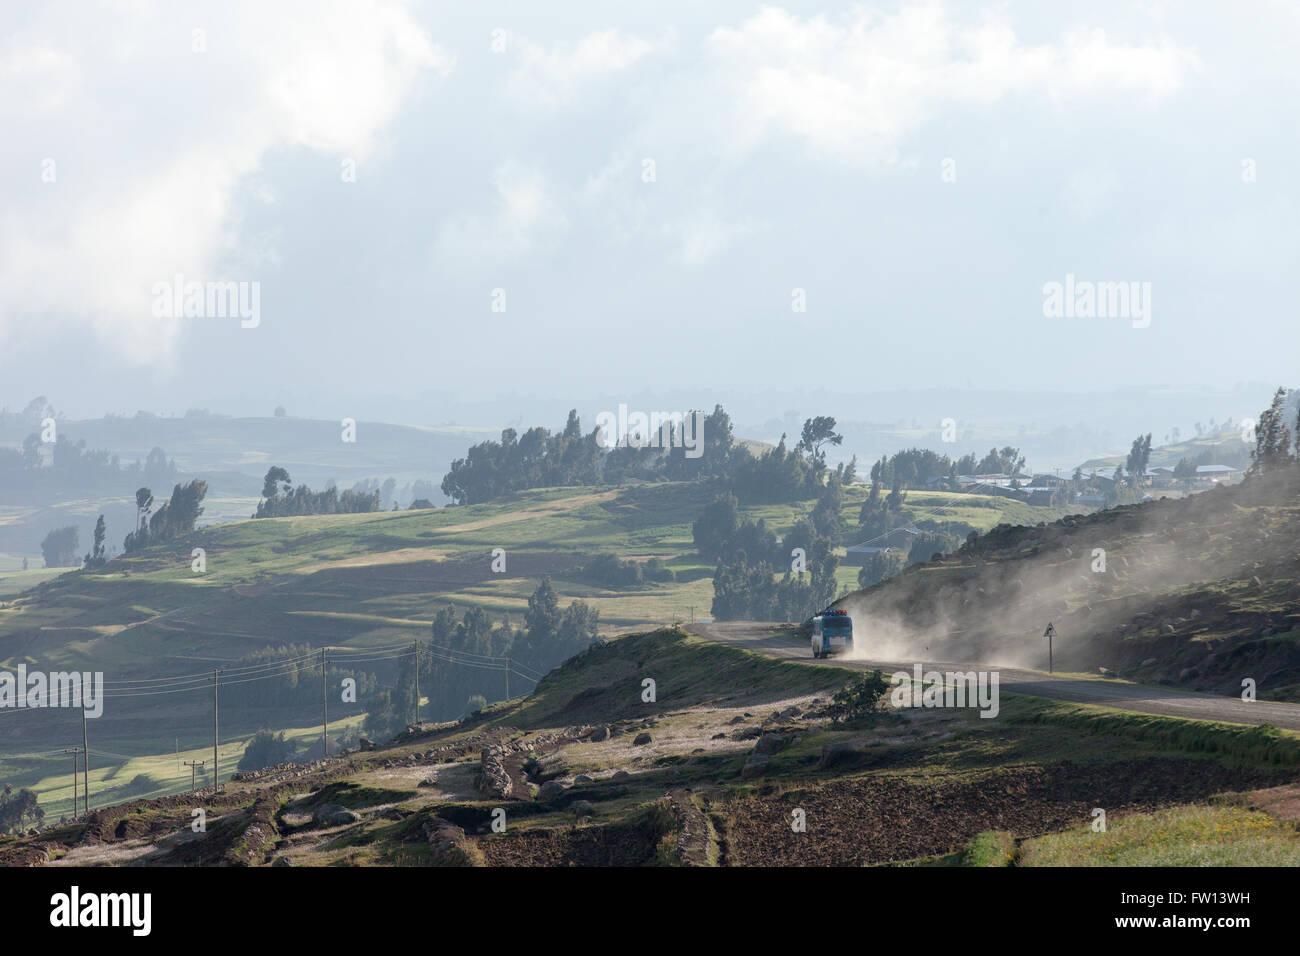 Furamariam village, Debele, Amhara, Ethiopia, October 2013:  A bus kicks up dust on the road through the windswept valley. Stock Photo